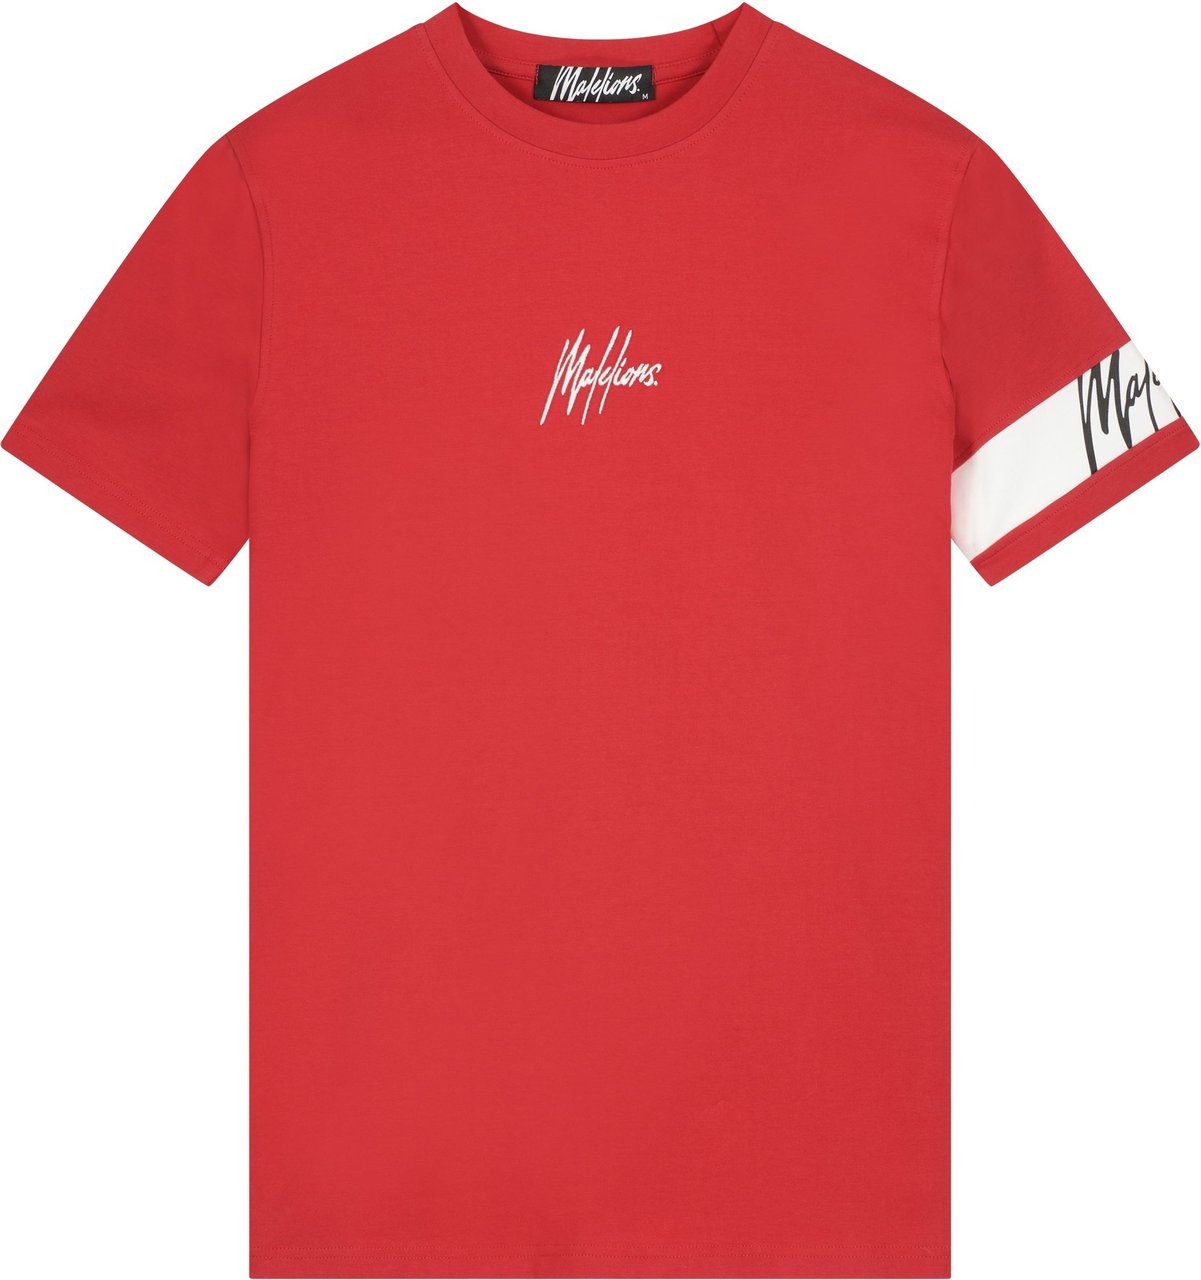 Malelions Captain T-Shirt - Red/White Rood